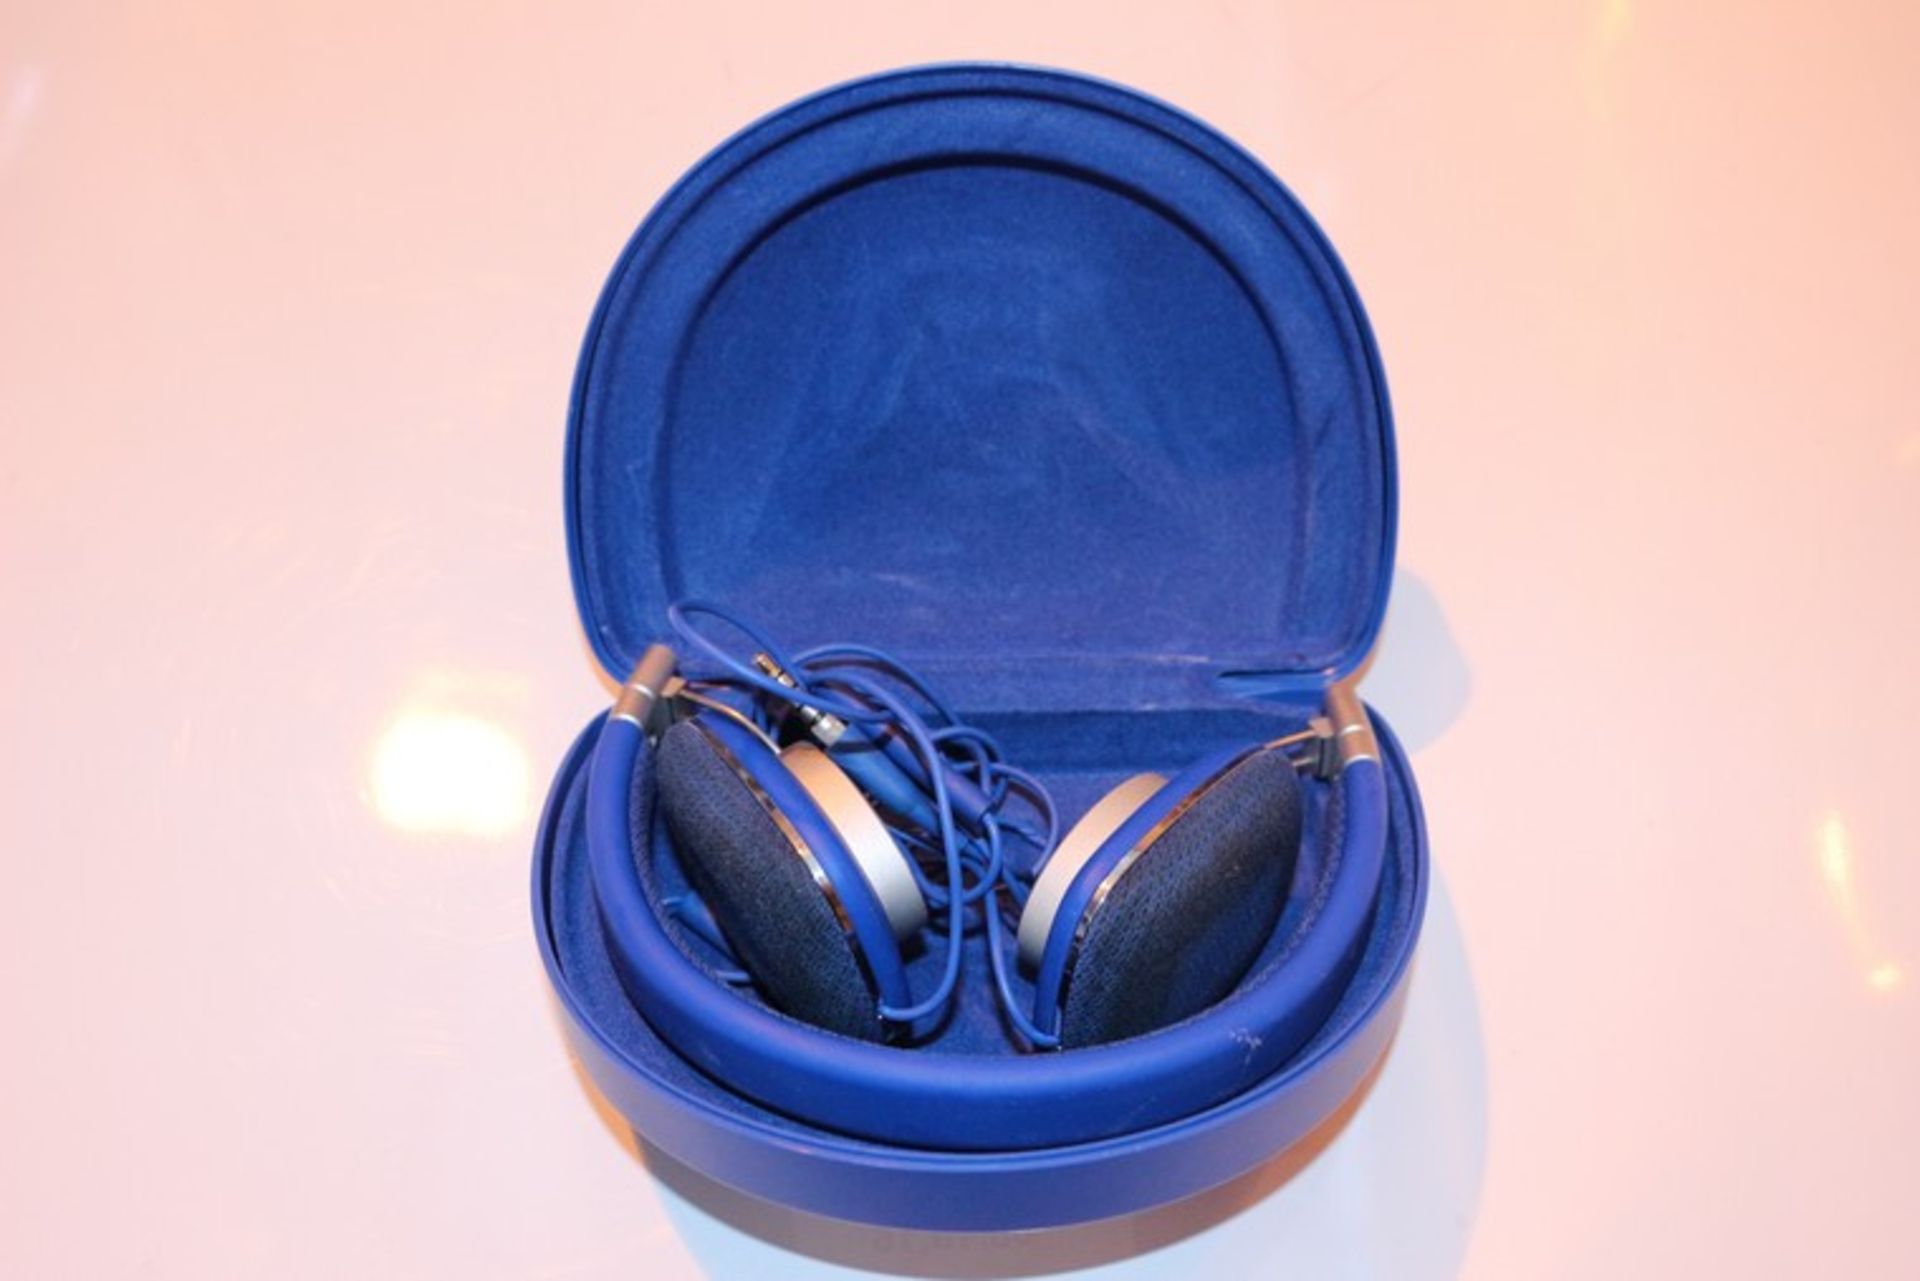 1 x PAIR OF BOWER AND WILKINS HEADPHONES *PLEASE NOTE THAT THE BID PRICE IS MULTIPLIED BY THE NUMBER